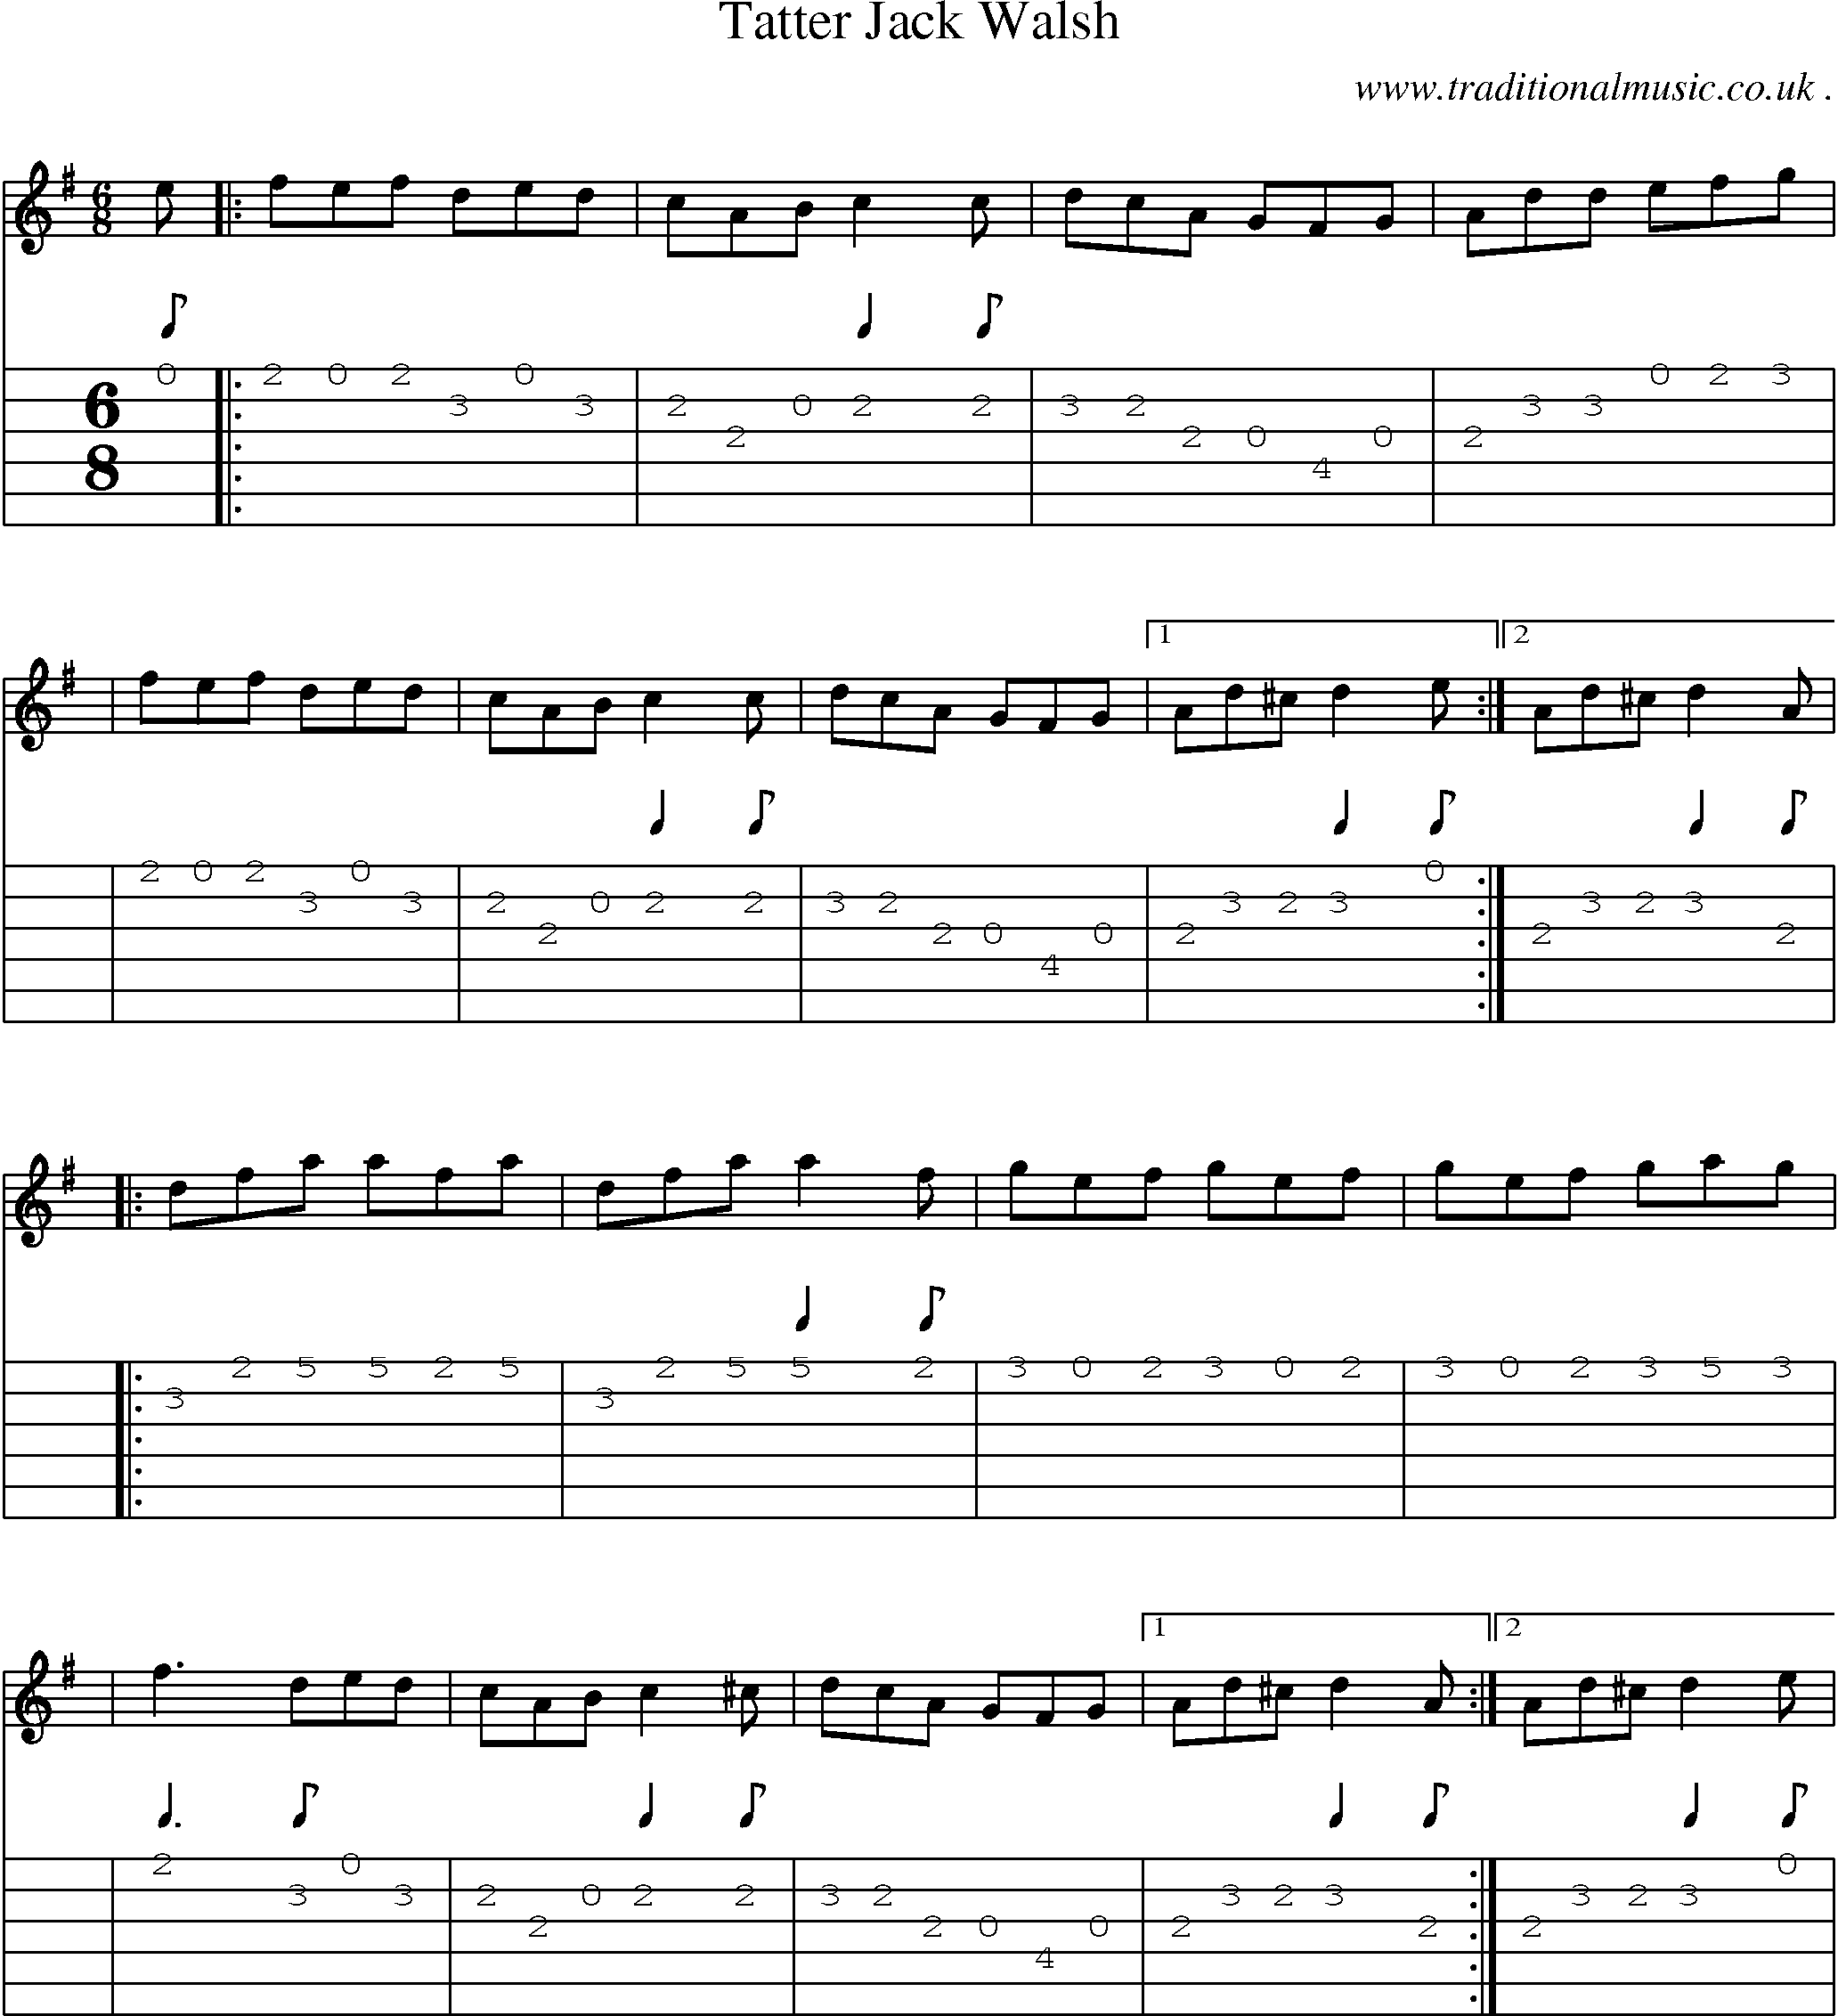 Sheet-Music and Guitar Tabs for Tatter Jack Walsh